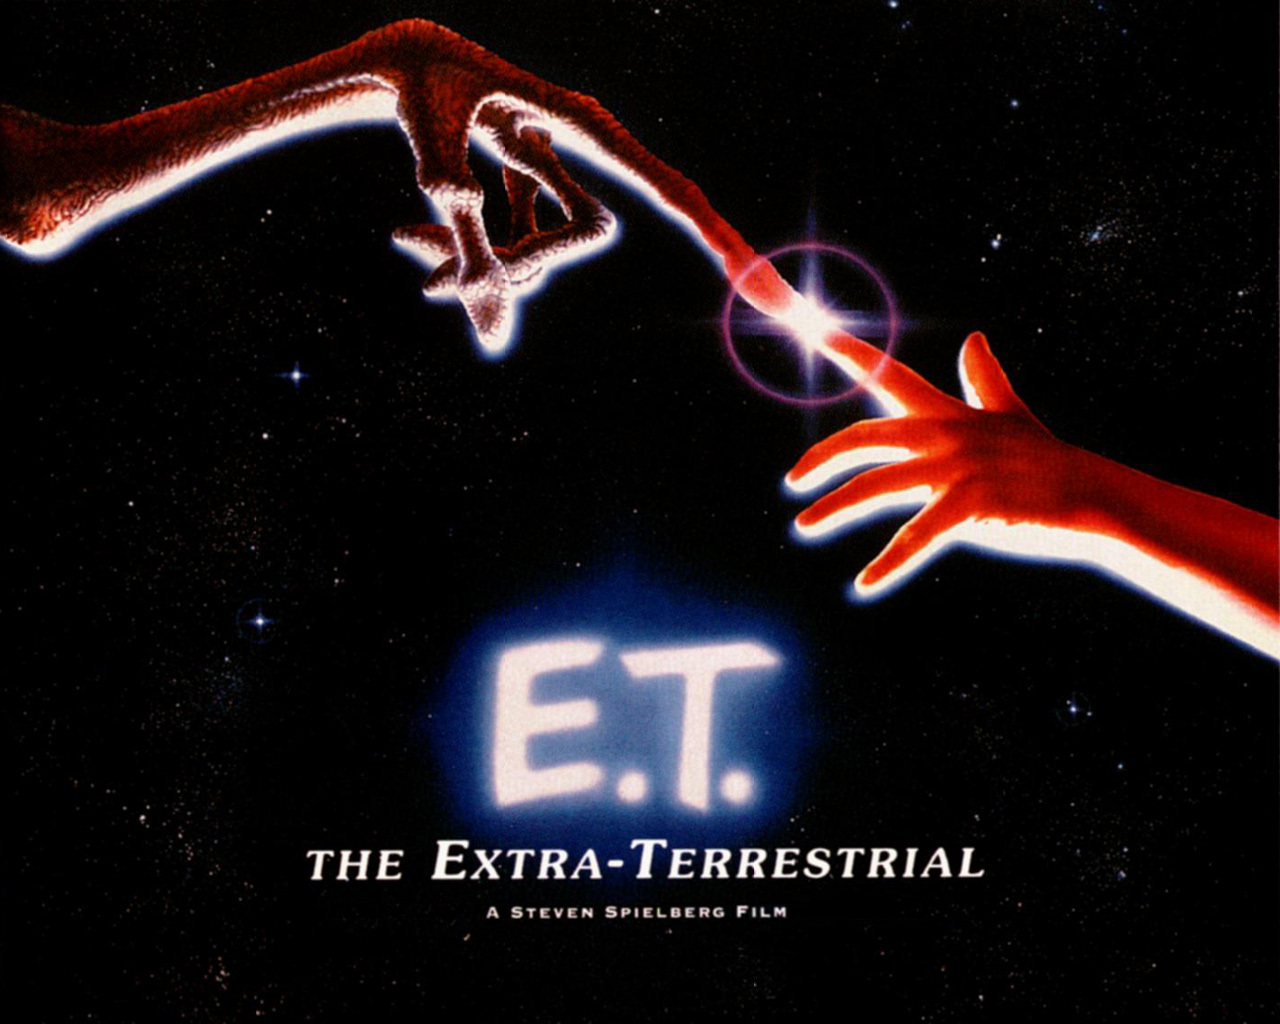 free for mac download E.T. the Extra-Terrestrial